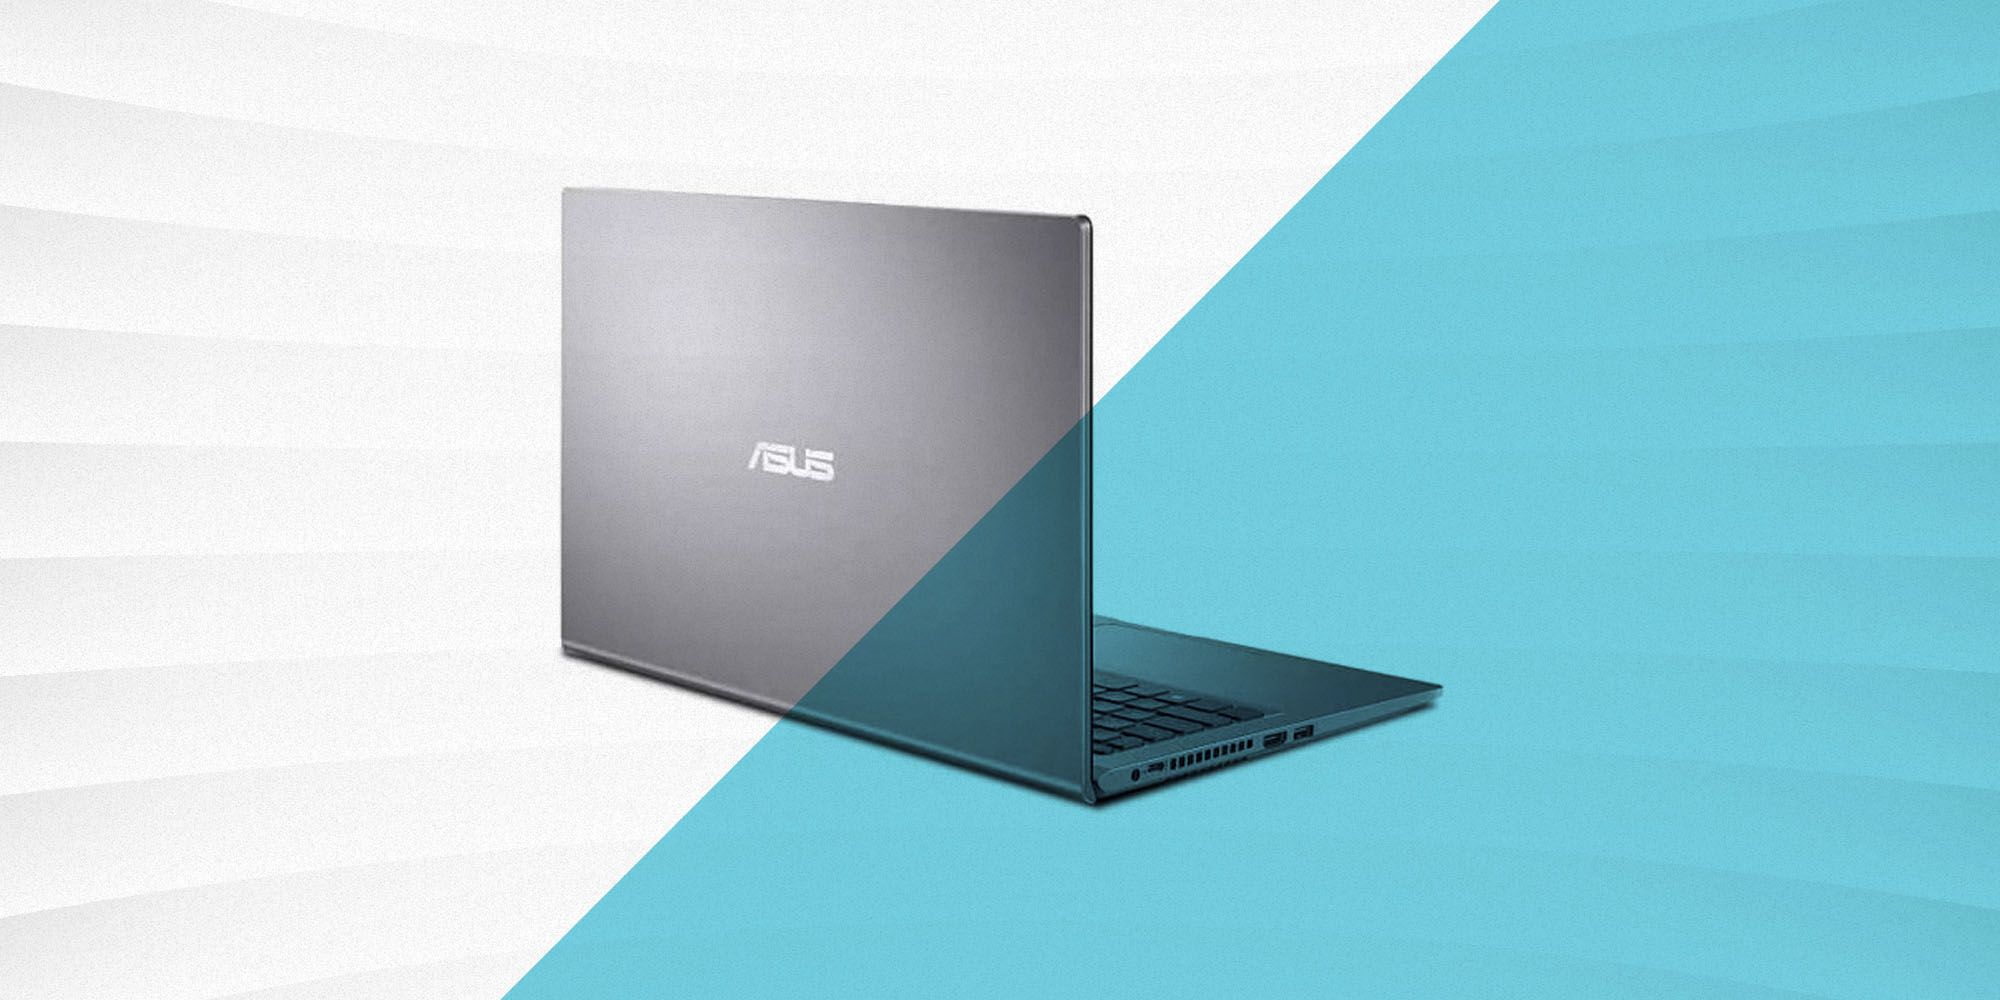 What Is The Best And Cheapest Gaming Laptop Under $500